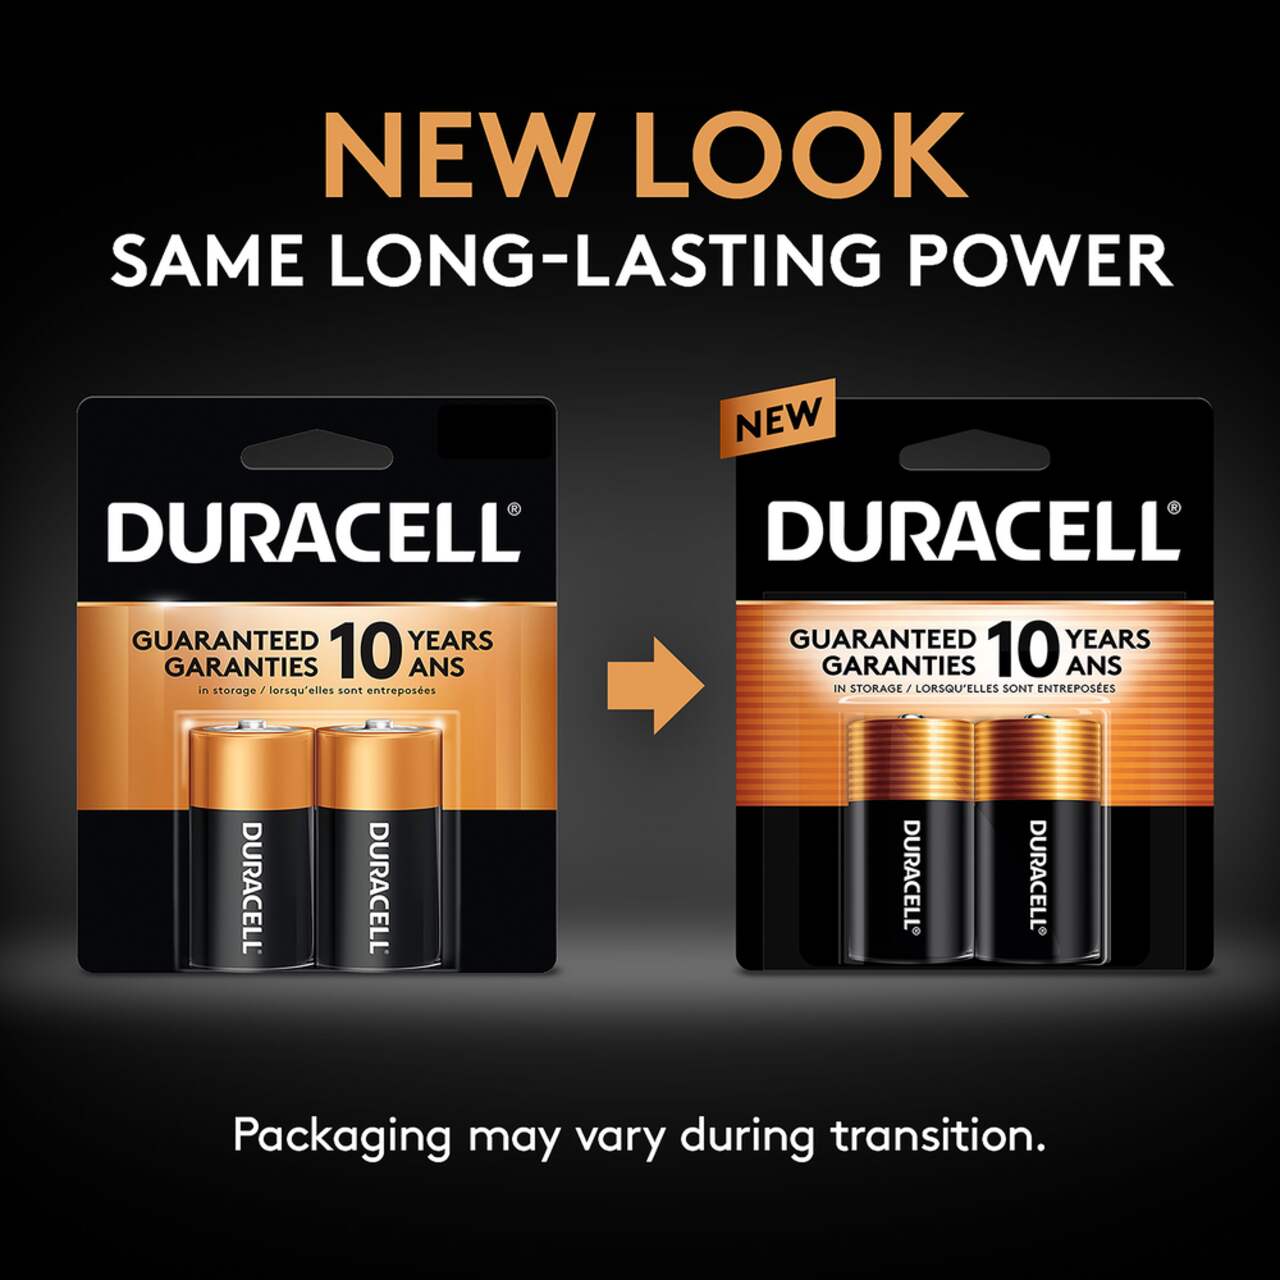 Duracell N 1.5V Alkaline Battery, 2 Count Pack, N 1.5 Volt Alkaline  Battery, Long-Lasting for Medical Devices, Key Fobs, GPS Trackers, and More